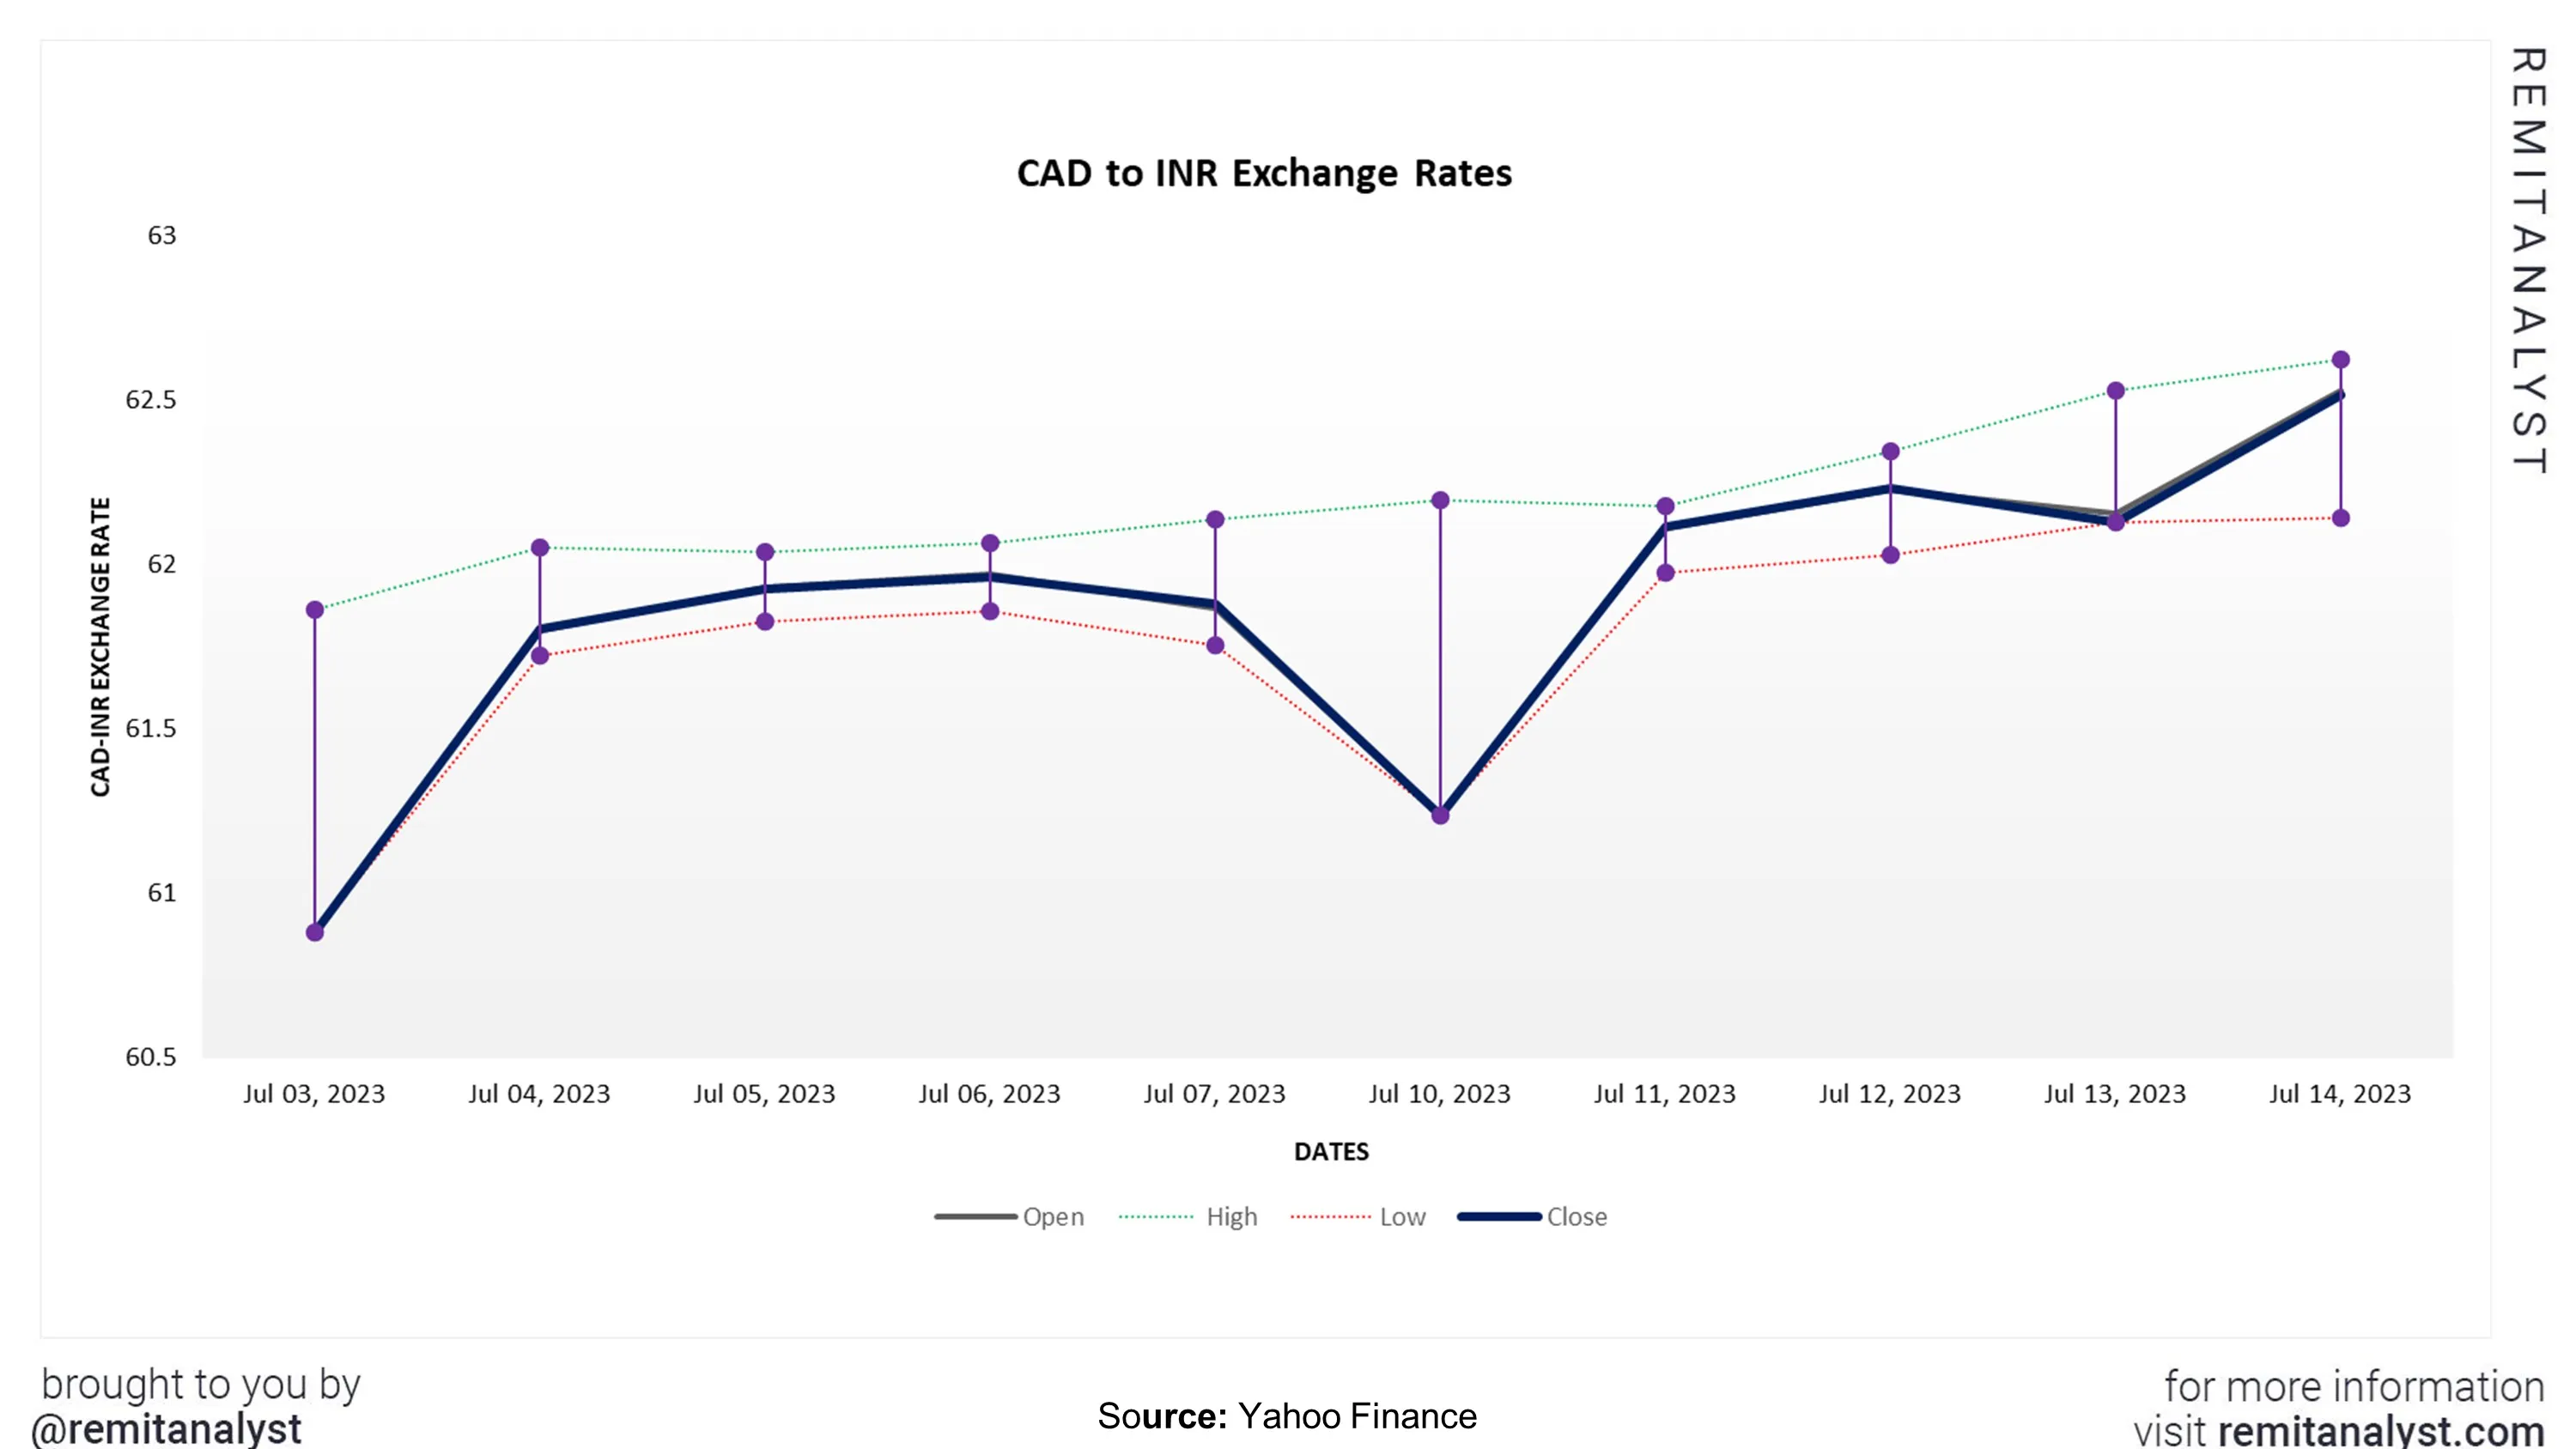 cad-to-inr-exchange-rate-from-3-july-2023-to-14-july-2023